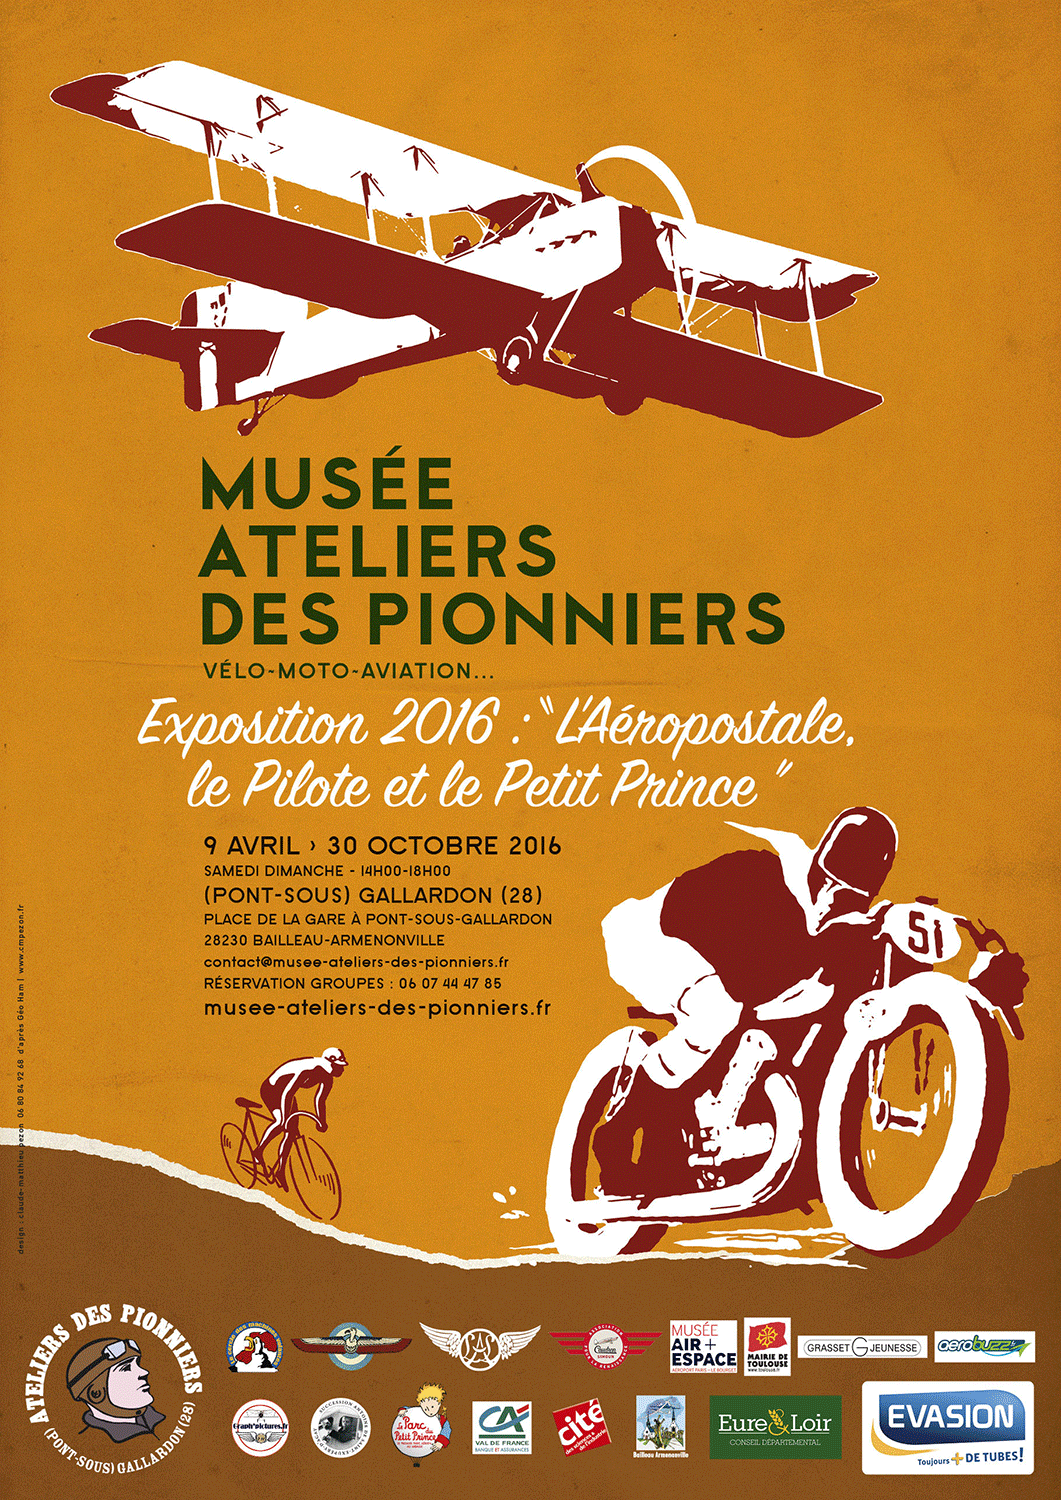 http://www.musee-ateliers-des-pionniers.fr/2015/index.html